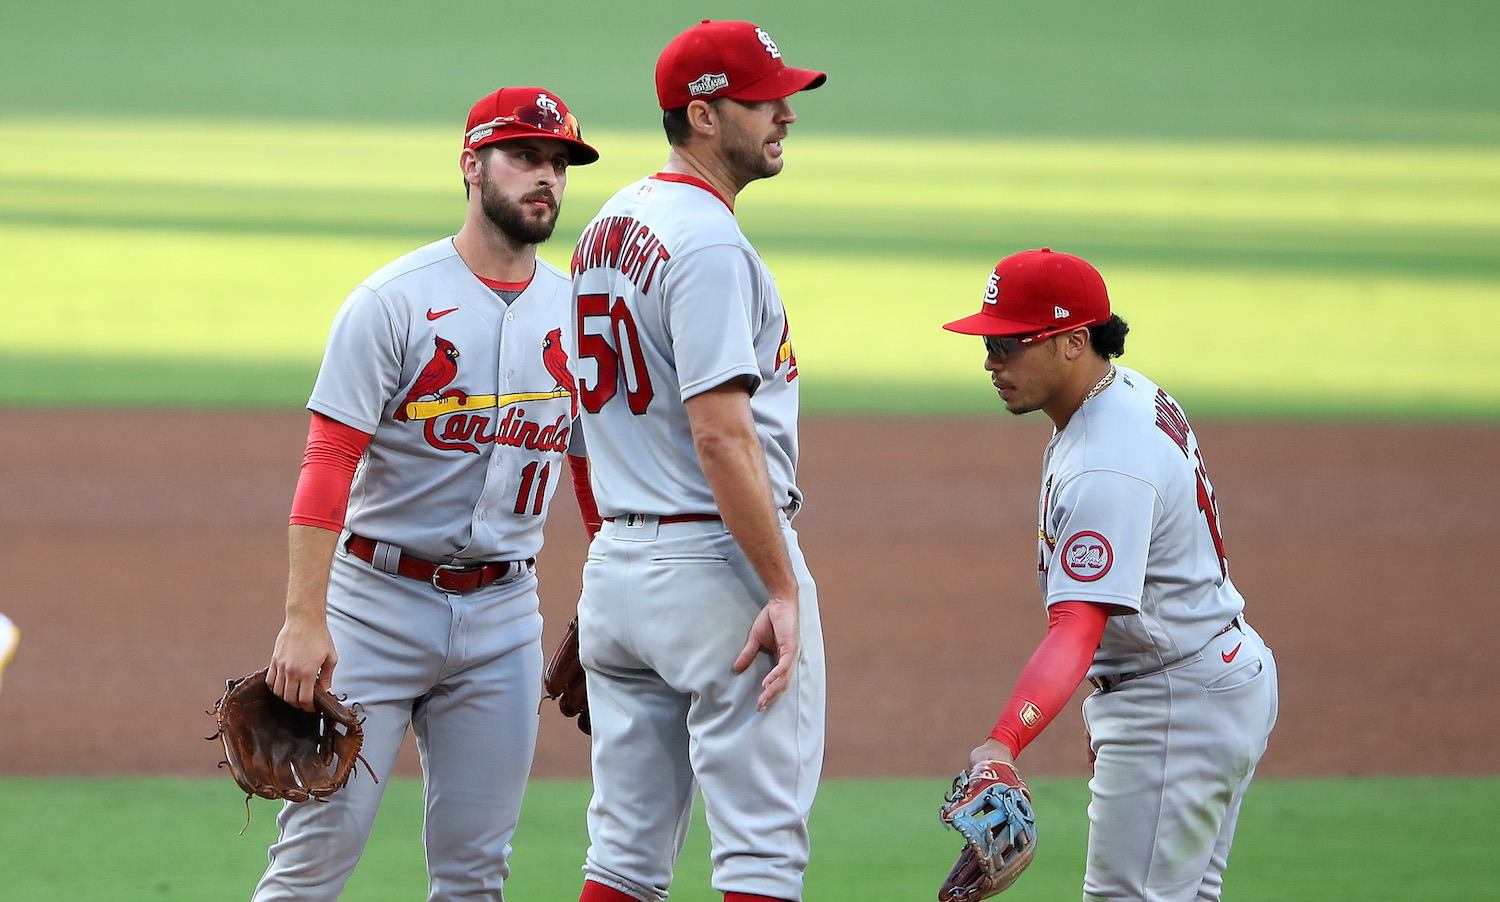 SAN DIEGO, CALIFORNIA - OCTOBER 01: Paul DeJong #11, and Kolten Wong #16 talk with Adam Wainwright #50 of the St. Louis Cardinals as he was being pulled from the game as Wil Myers #4 of the San Diego Padres walks to third base during the fourth inning of Game Two of the National League Wild Card Series at PETCO Park on October 01, 2020 in San Diego, California. (Photo by Sean M. Haffey/Getty Images)